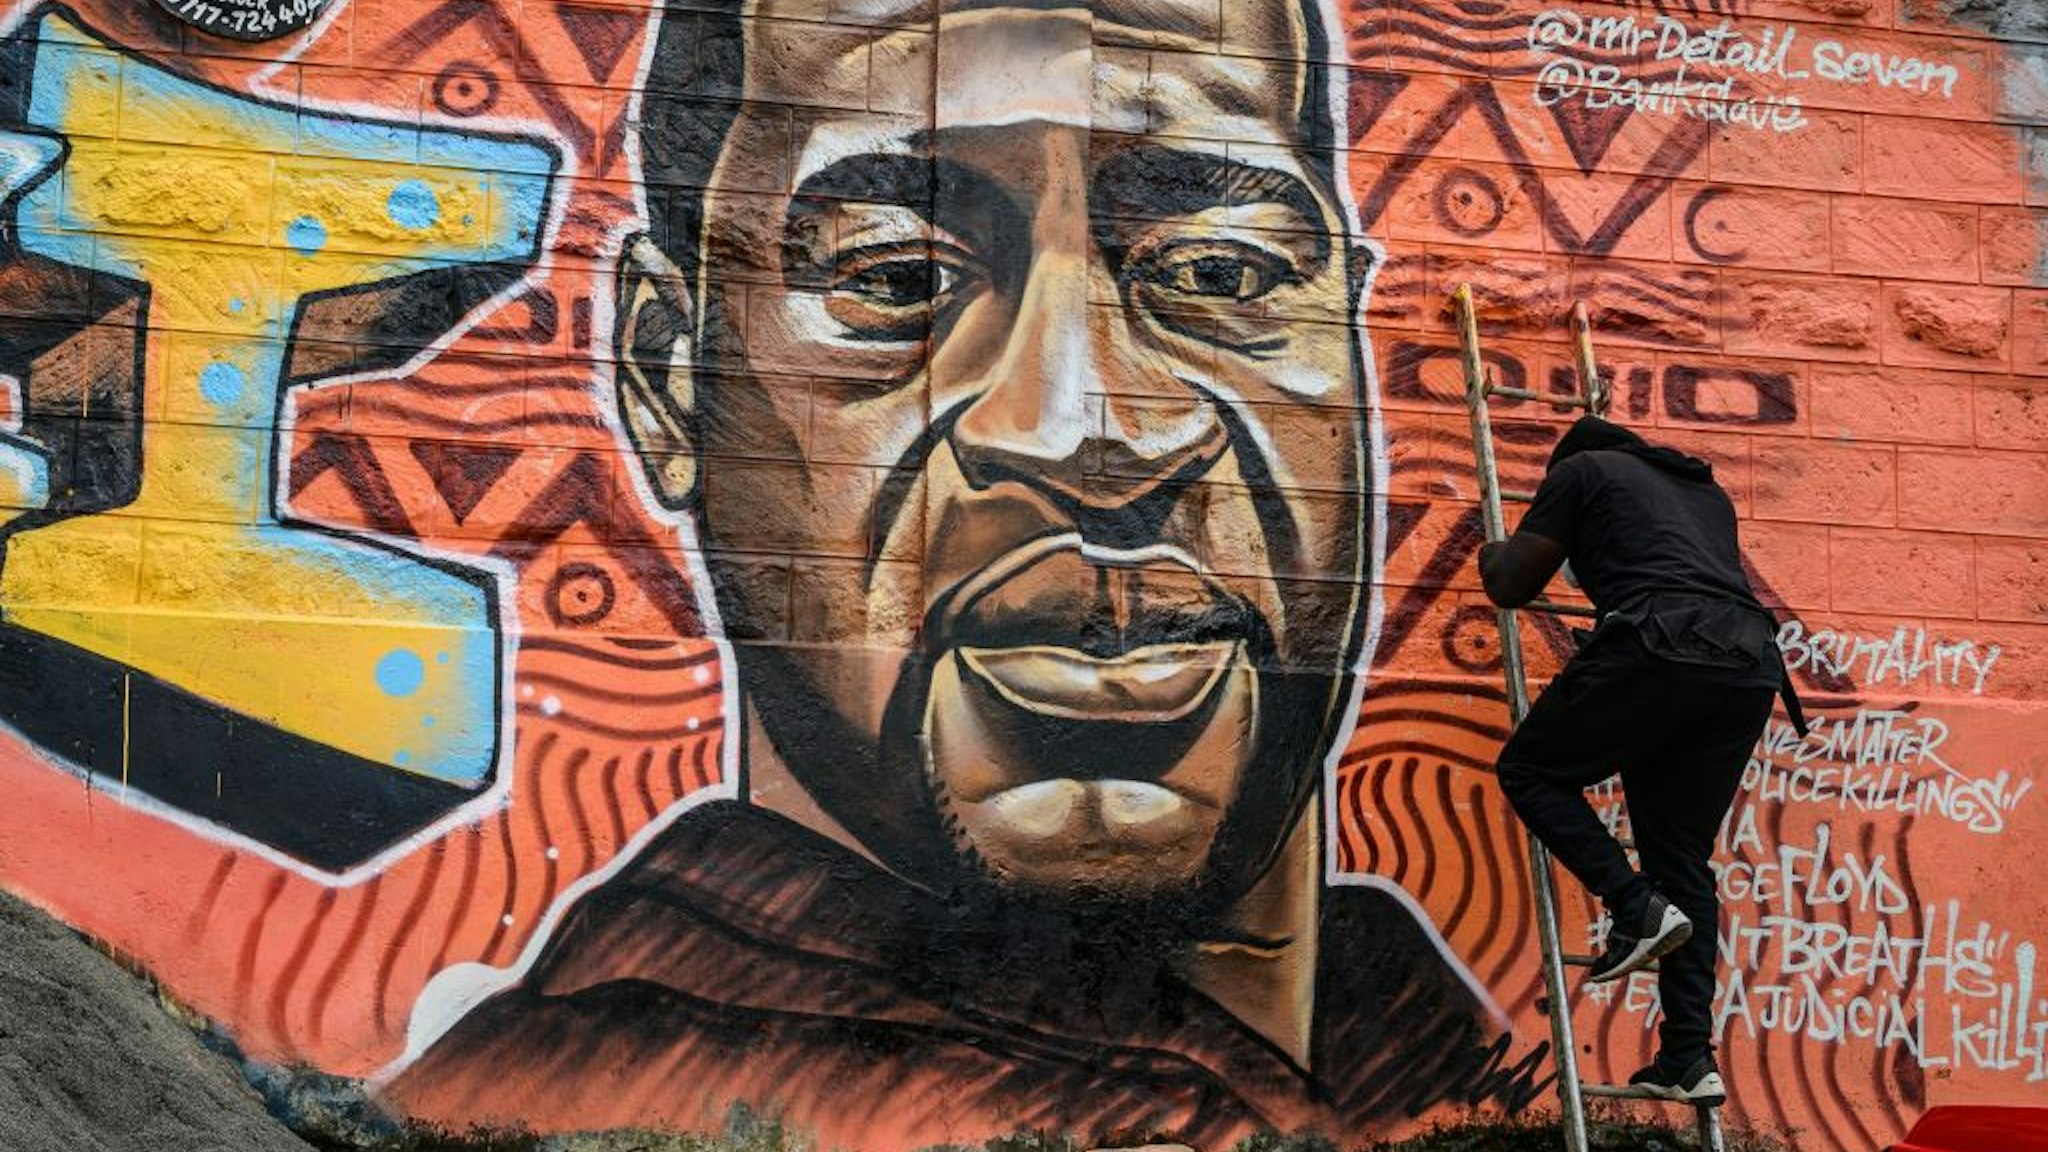 Kenyan mural artist Allan Mwangi, also known as Mr.detail.seven, paints a graffiti mural in the Kibera slum in Nairobi on June 3, 2020, depicting the American, George Floyd, who was killed by a police officer in Minneapolis, in the United States. (Photo by Gordwin ODHIAMBO / AFP) / RESTRICTED TO EDITORIAL USE - MANDATORY MENTION OF THE ARTIST UPON PUBLICATION - TO ILLUSTRATE THE EVENT AS SPECIFIED IN THE CAPTION (Photo by GORDWIN ODHIAMBO/AFP via Getty Images)